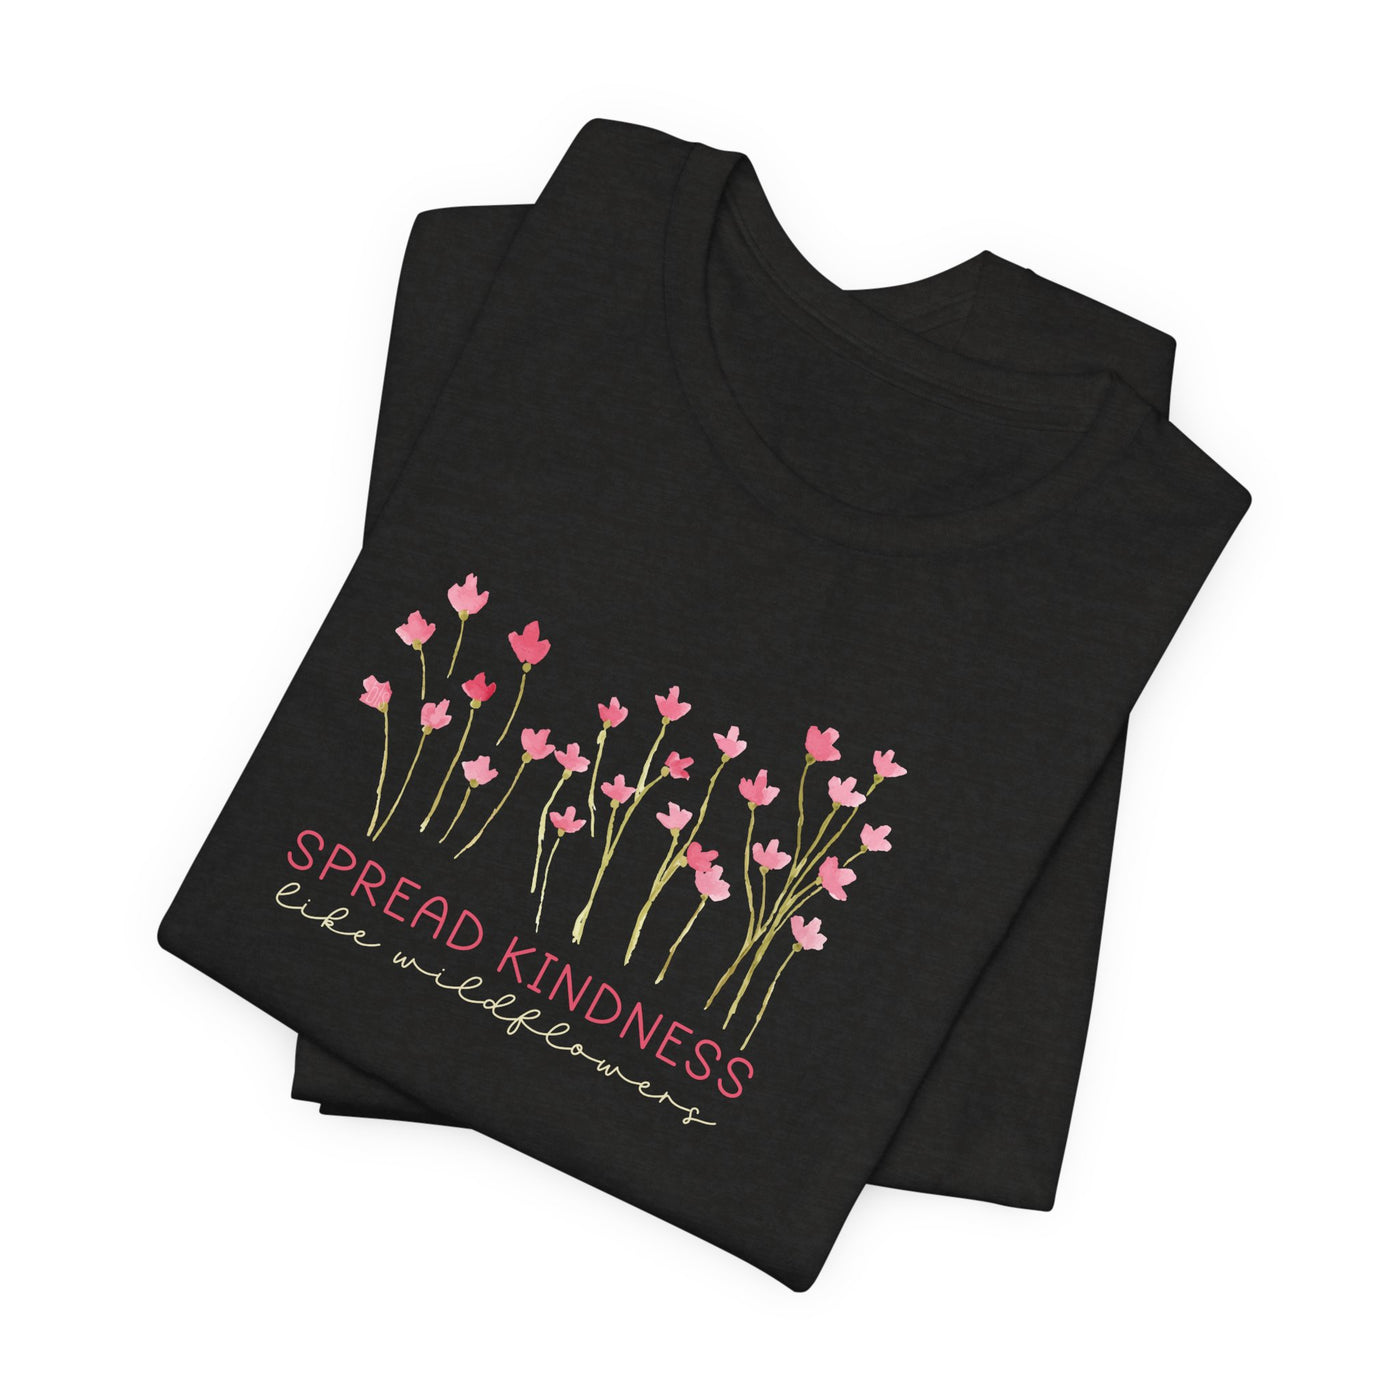 👚 MAY HAPPY T-SHIRT Spread Happiness Like Wildflowers Cozy T-Shirt